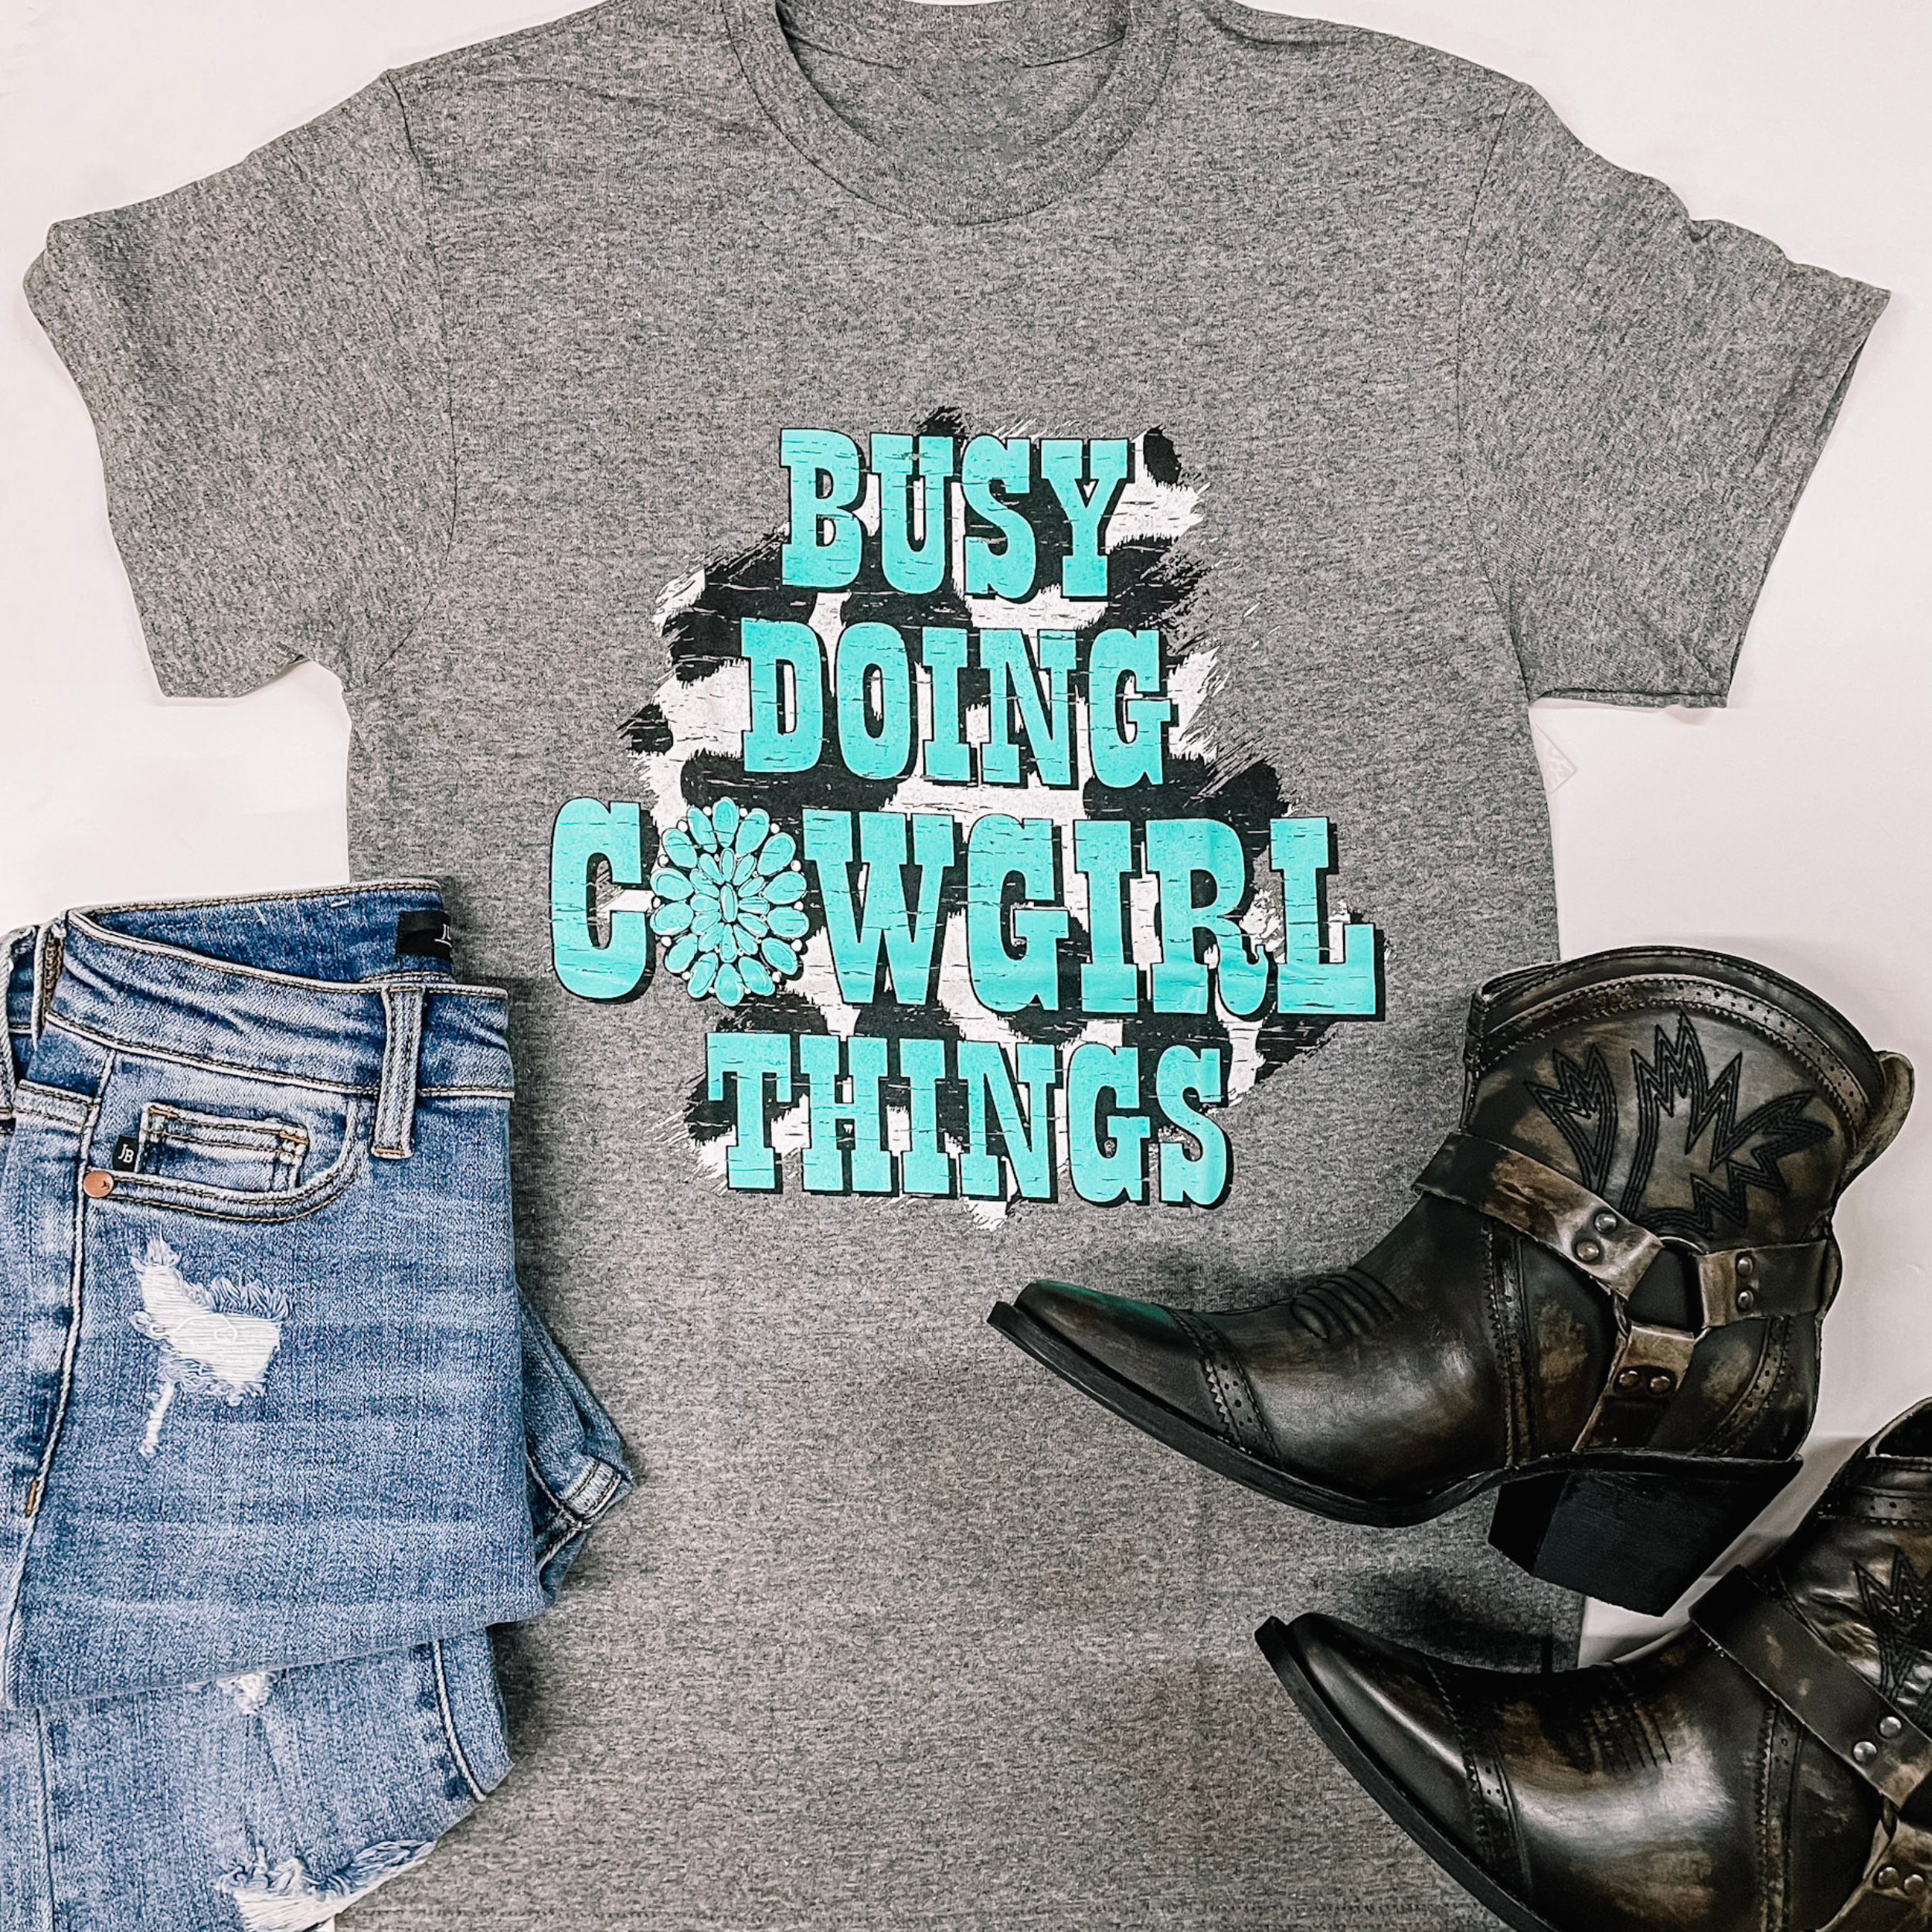 A grey tee is laid out on a white background. In the middle of the tee is a cowprint circle under turquoise letters that state, "Busy doing cowgirl things." Jeans are laid out on the bottom left corner and on the bottom right is a black pair of boots.  